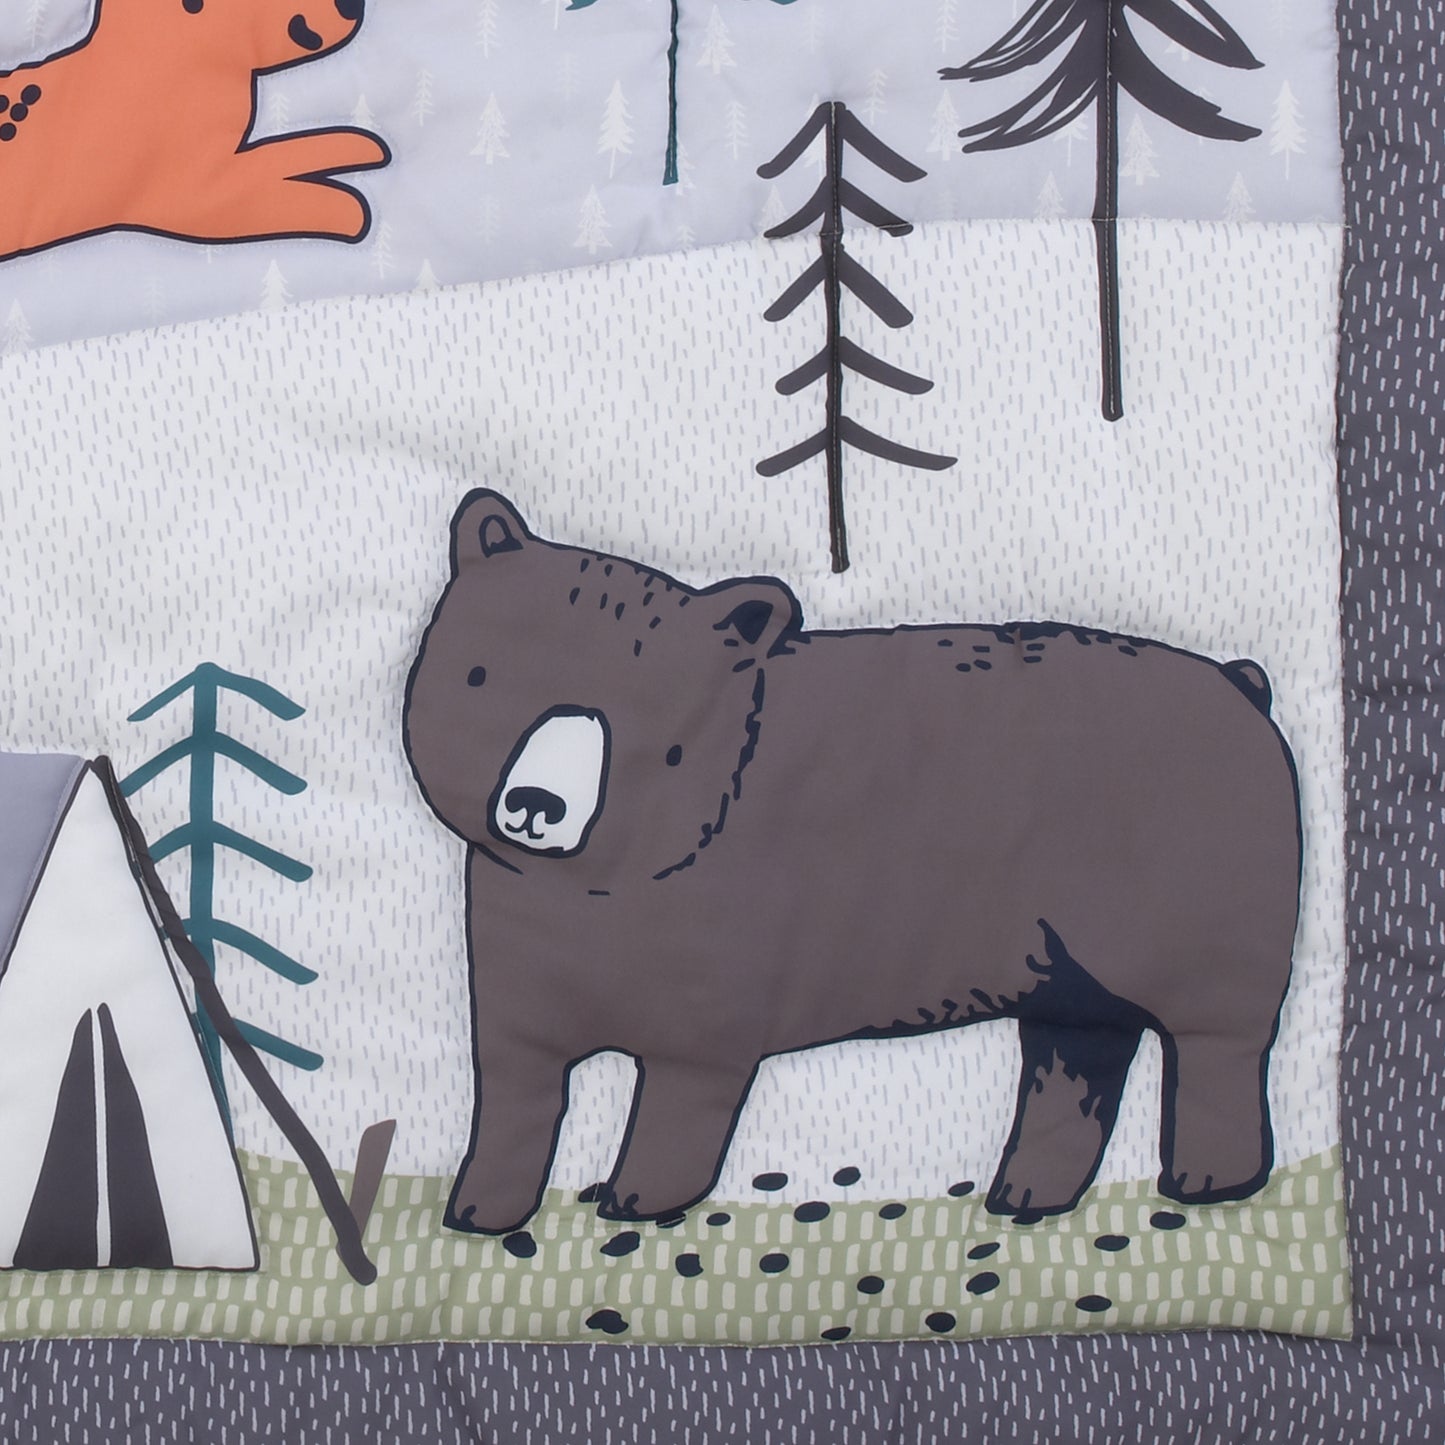 Carter's Woodland Friends Gray Multi Colored Bear and Fox, Squirrel, Tree, Tent, and Campfire 3 Piece Nursery Crib Bedding Set - Comforter, Fitted Crib Sheet, and Crib Skirt